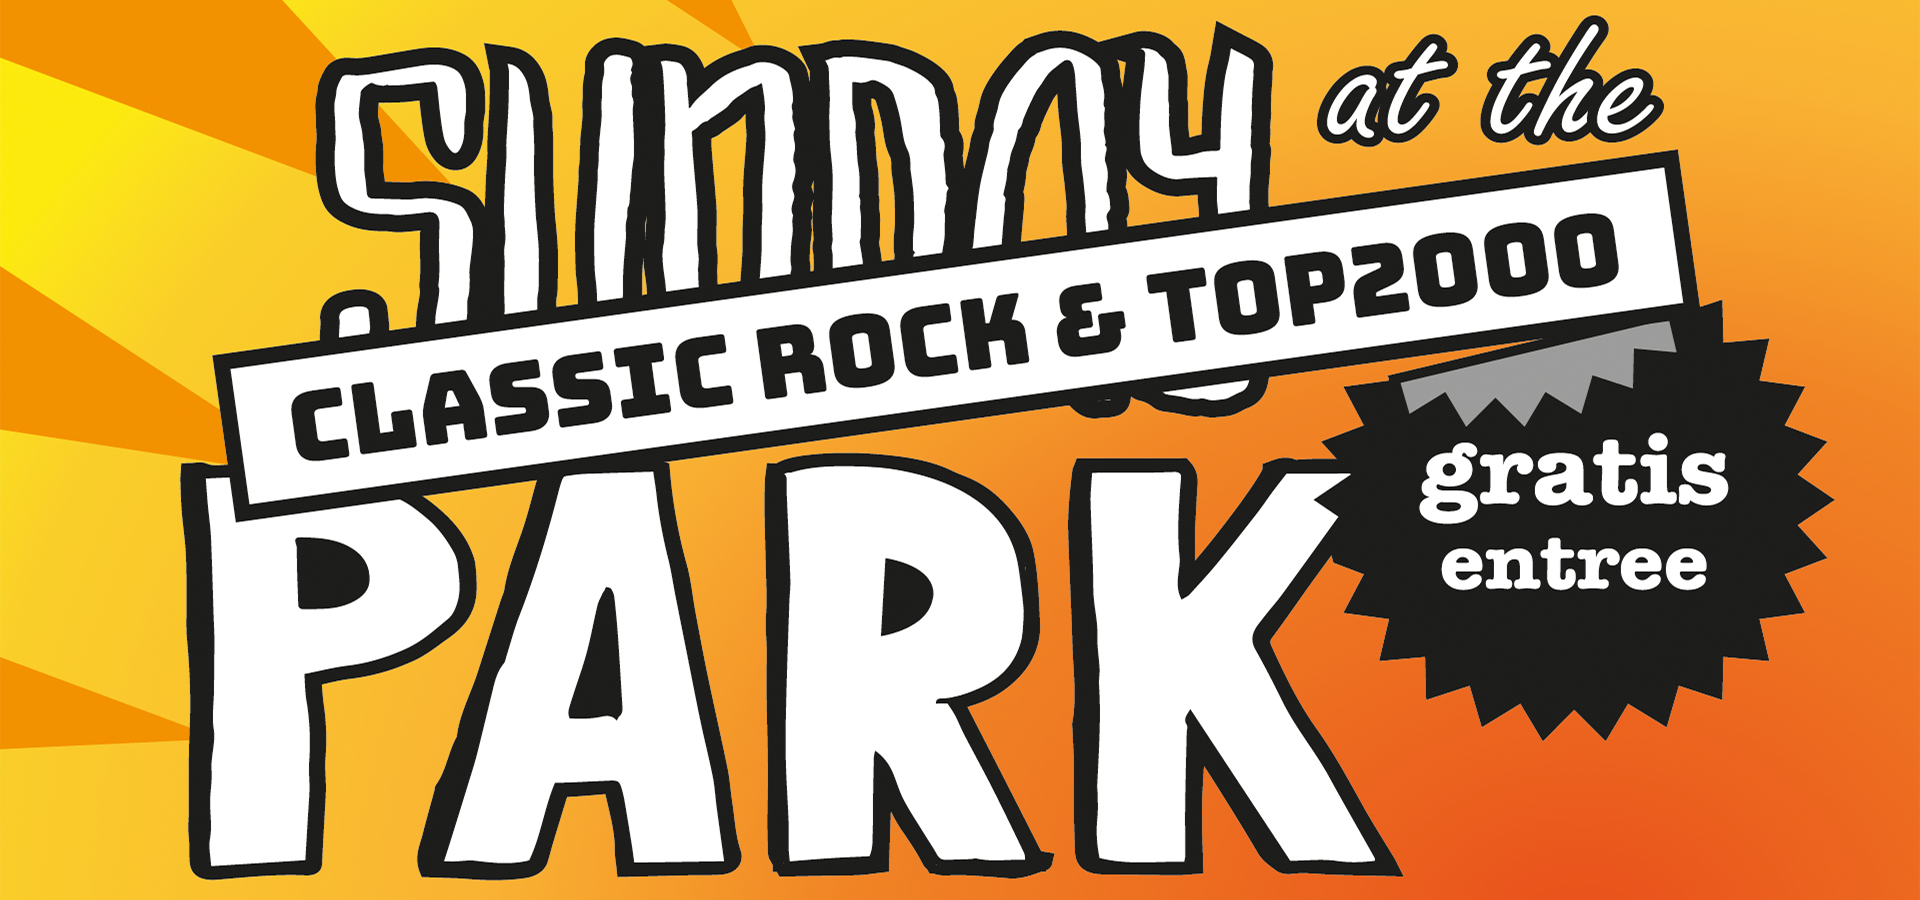 Sunday at the Park - Classic Rock & Top2000